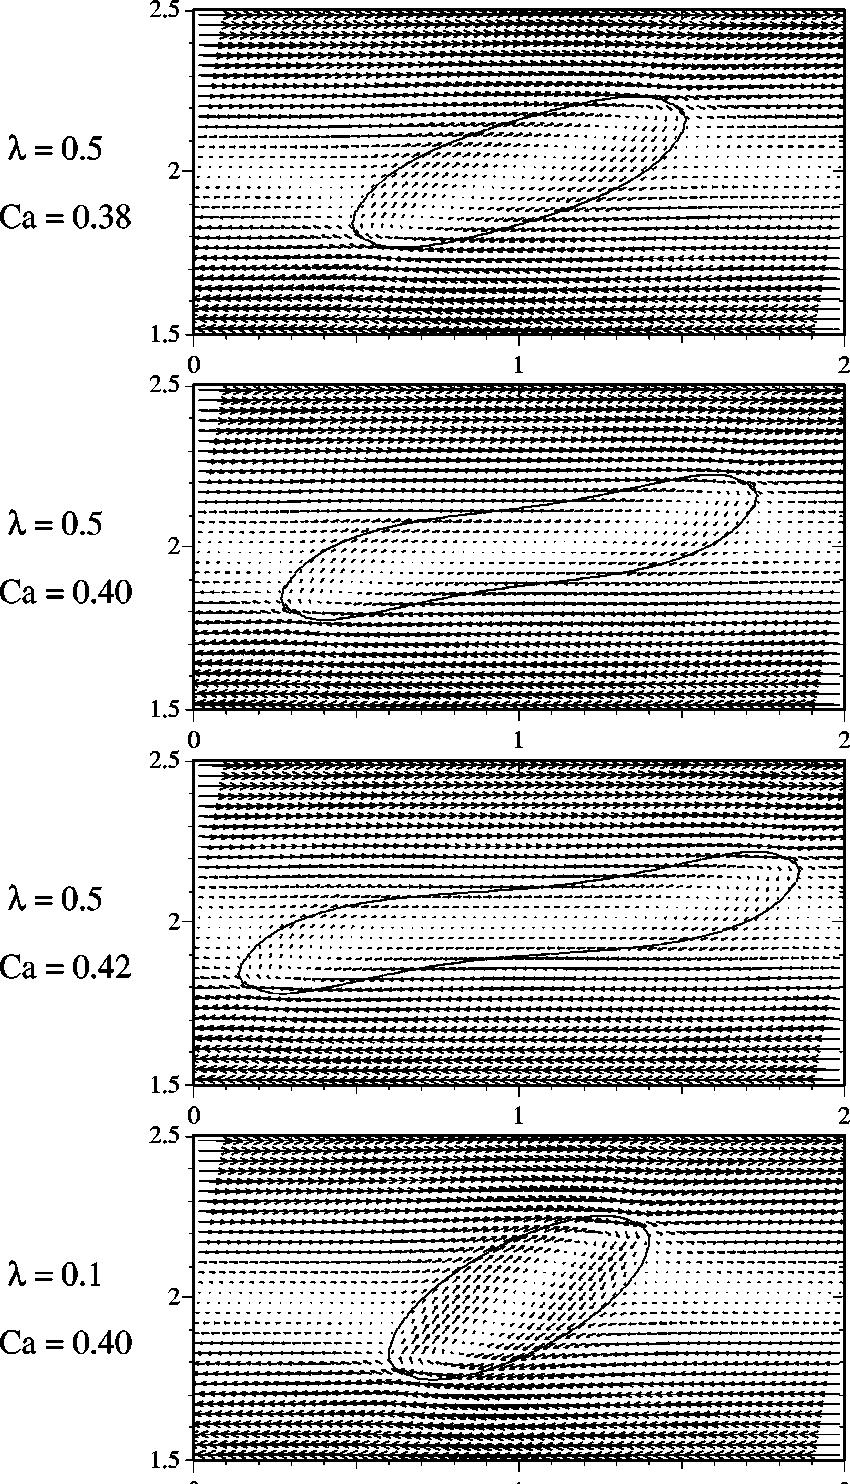 Phys. Fluids, Vol. 12, No. 2, February 2000 Numerical simulation of breakup of viscous drop in simple shear... 275 FIG. 8. Deformation of a viscous drop in simple shear flow.